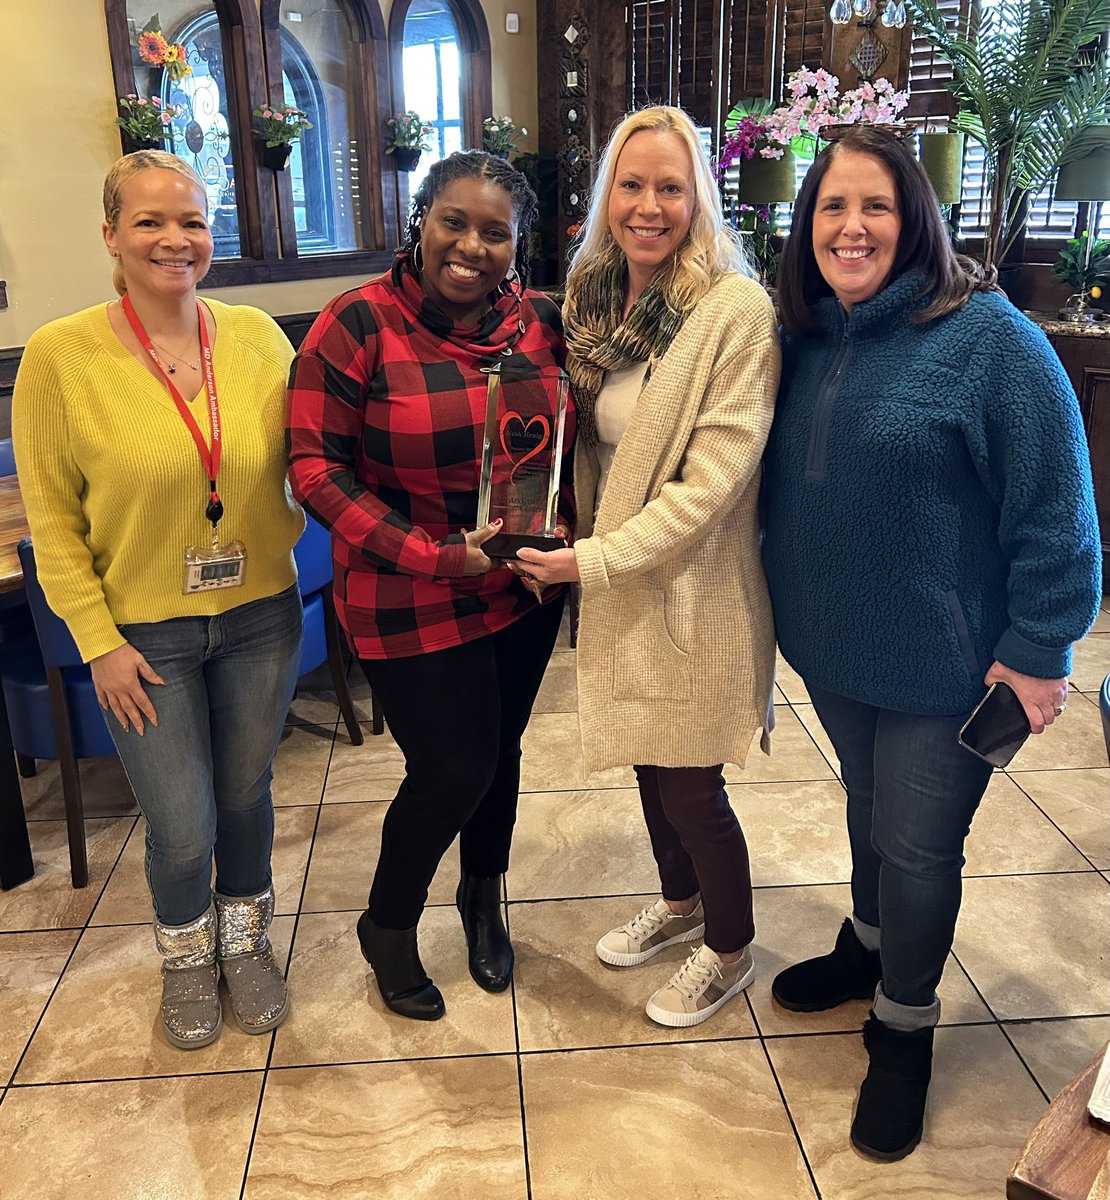 That’s right everyone…the January Heart of @MDAndersonNews is on our team!! Today we celebrated the awesomeness of @Luvelyo! O’Neak is a rockstar known throughout our community for educating about the dangers of tobacco! Thanks for nominating her, @kwindisch98! #EndCancer